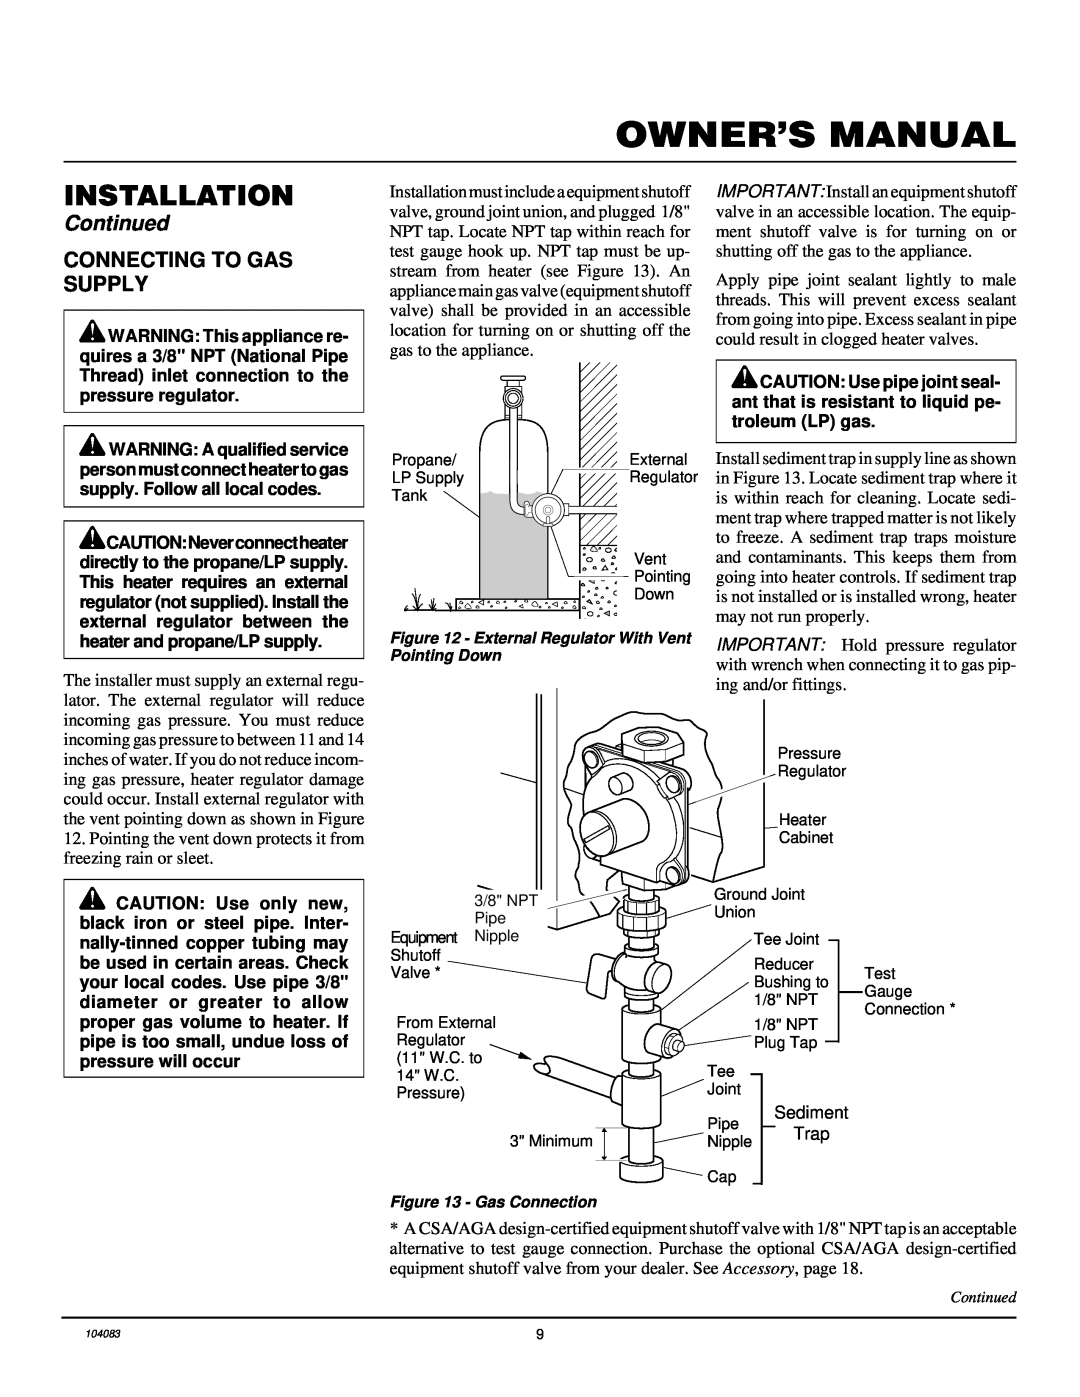 Desa VP10TA installation manual Connecting To Gas Supply, Installation, Continued 